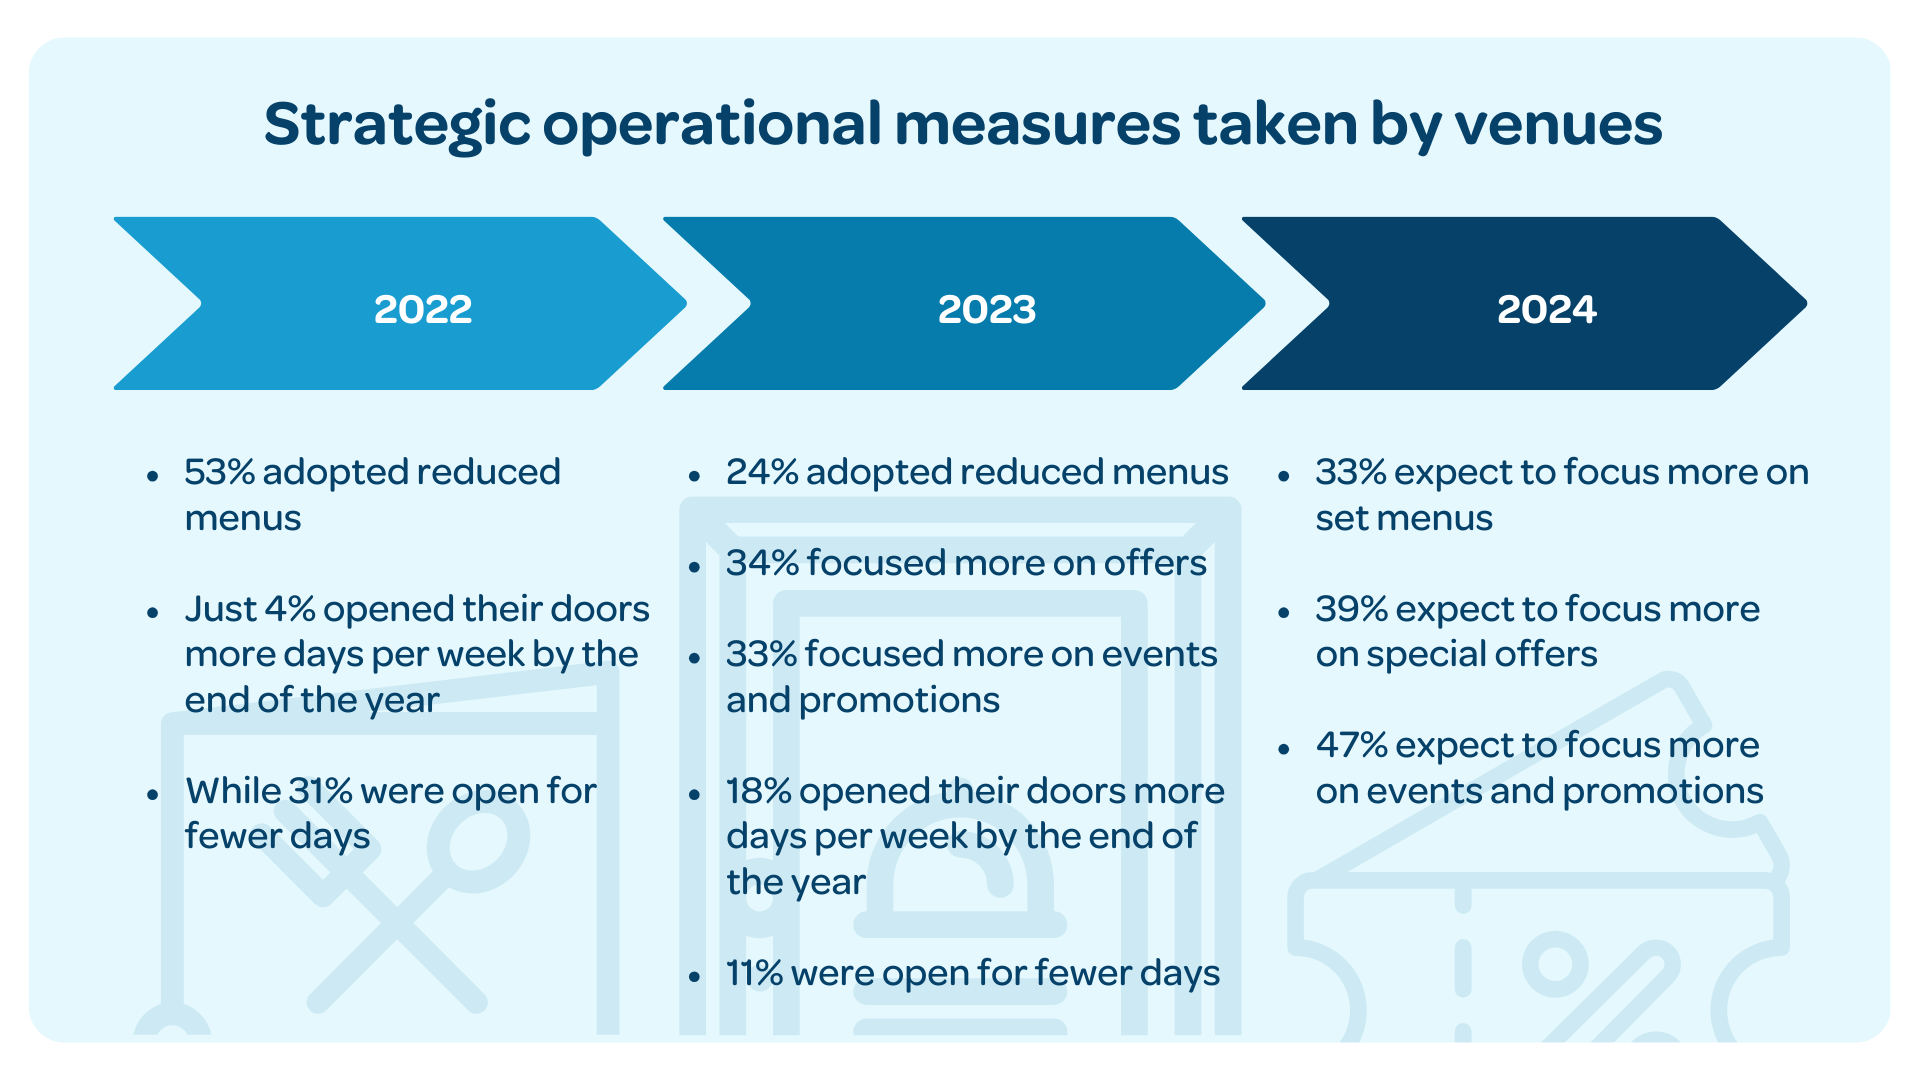 Operational measures taken by hospitality venues in 2022, 2023 and 2024